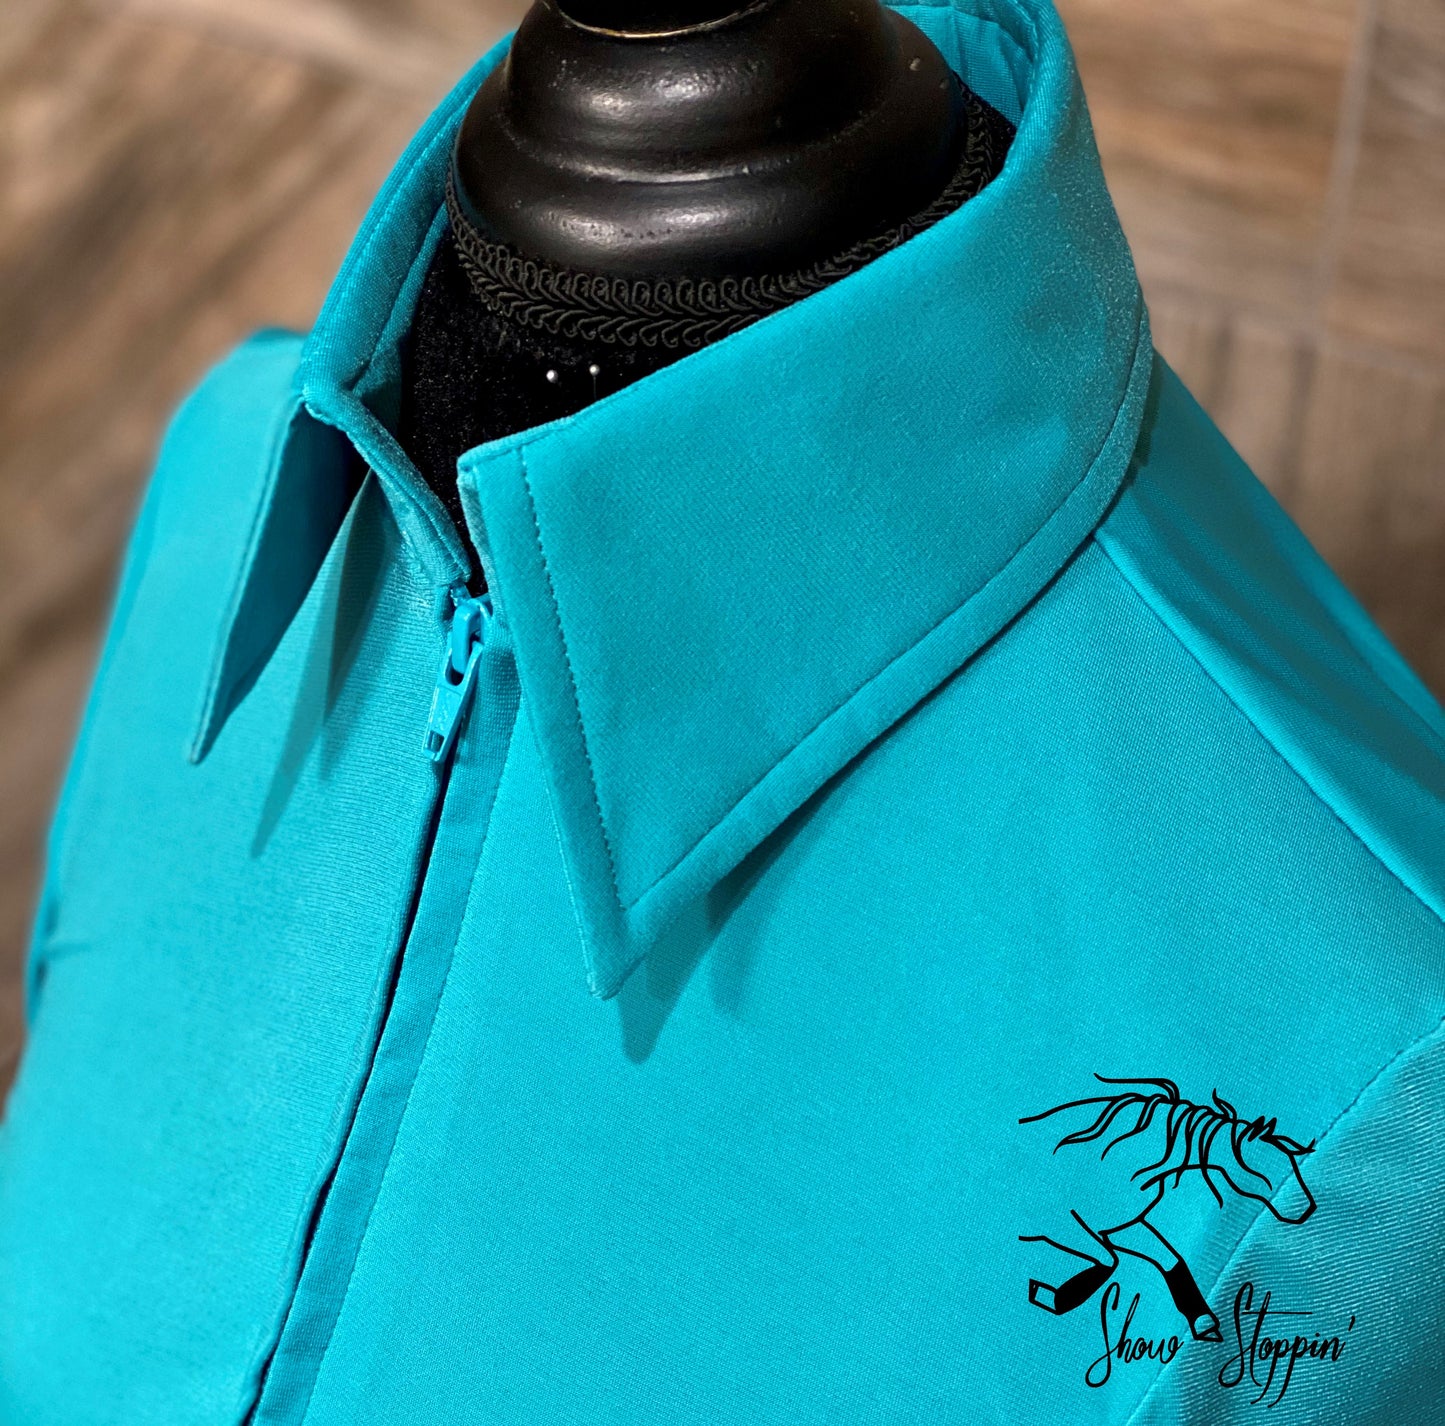 Bright Teal Light Weight Fitted Shirt - Show Stoppin'